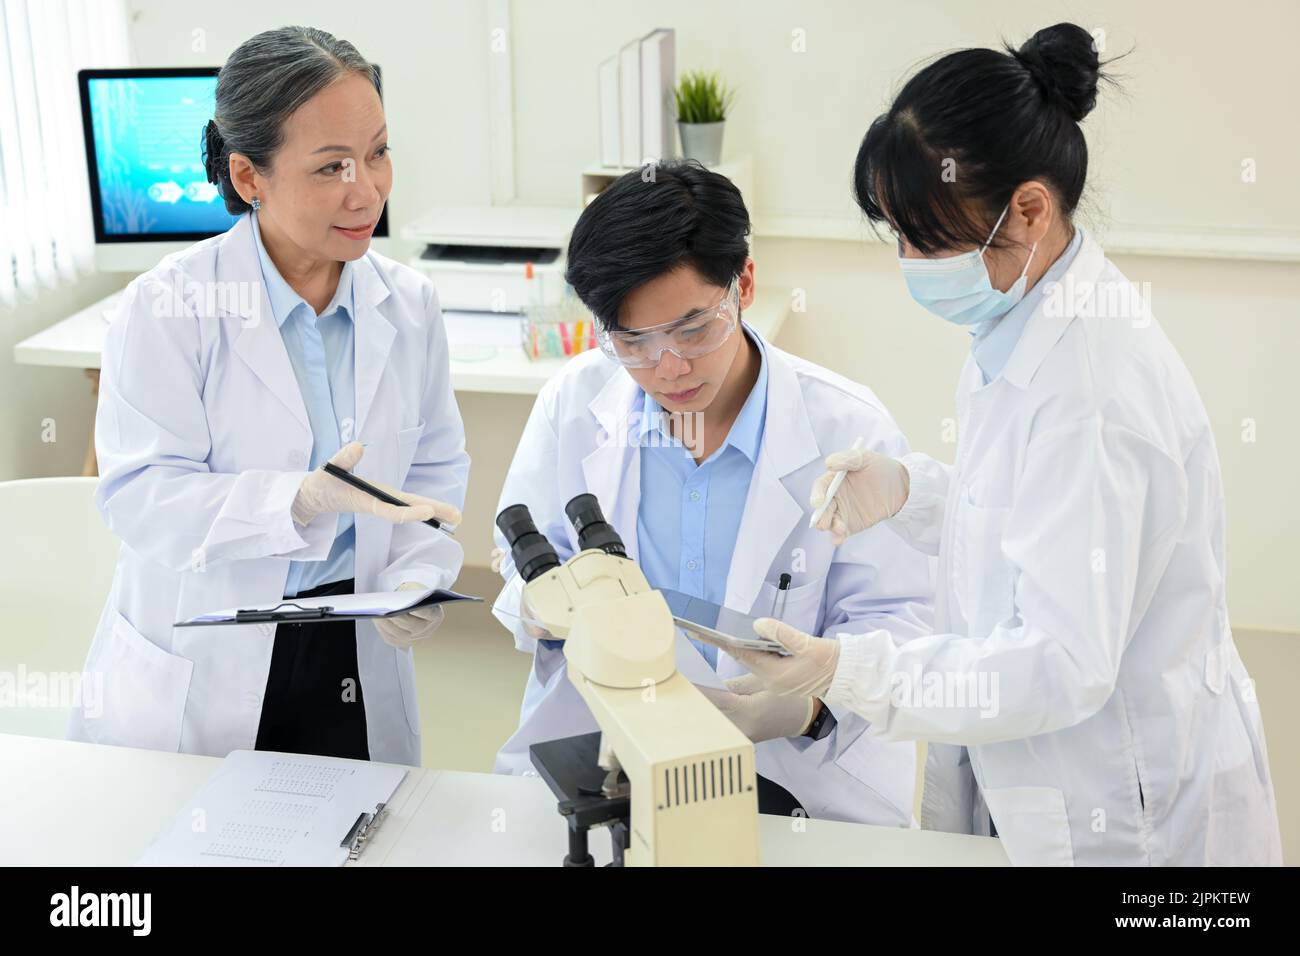 A professional and talented Asian scientist team is discussing and brainstorming on a new project in the lab. Stock Photo